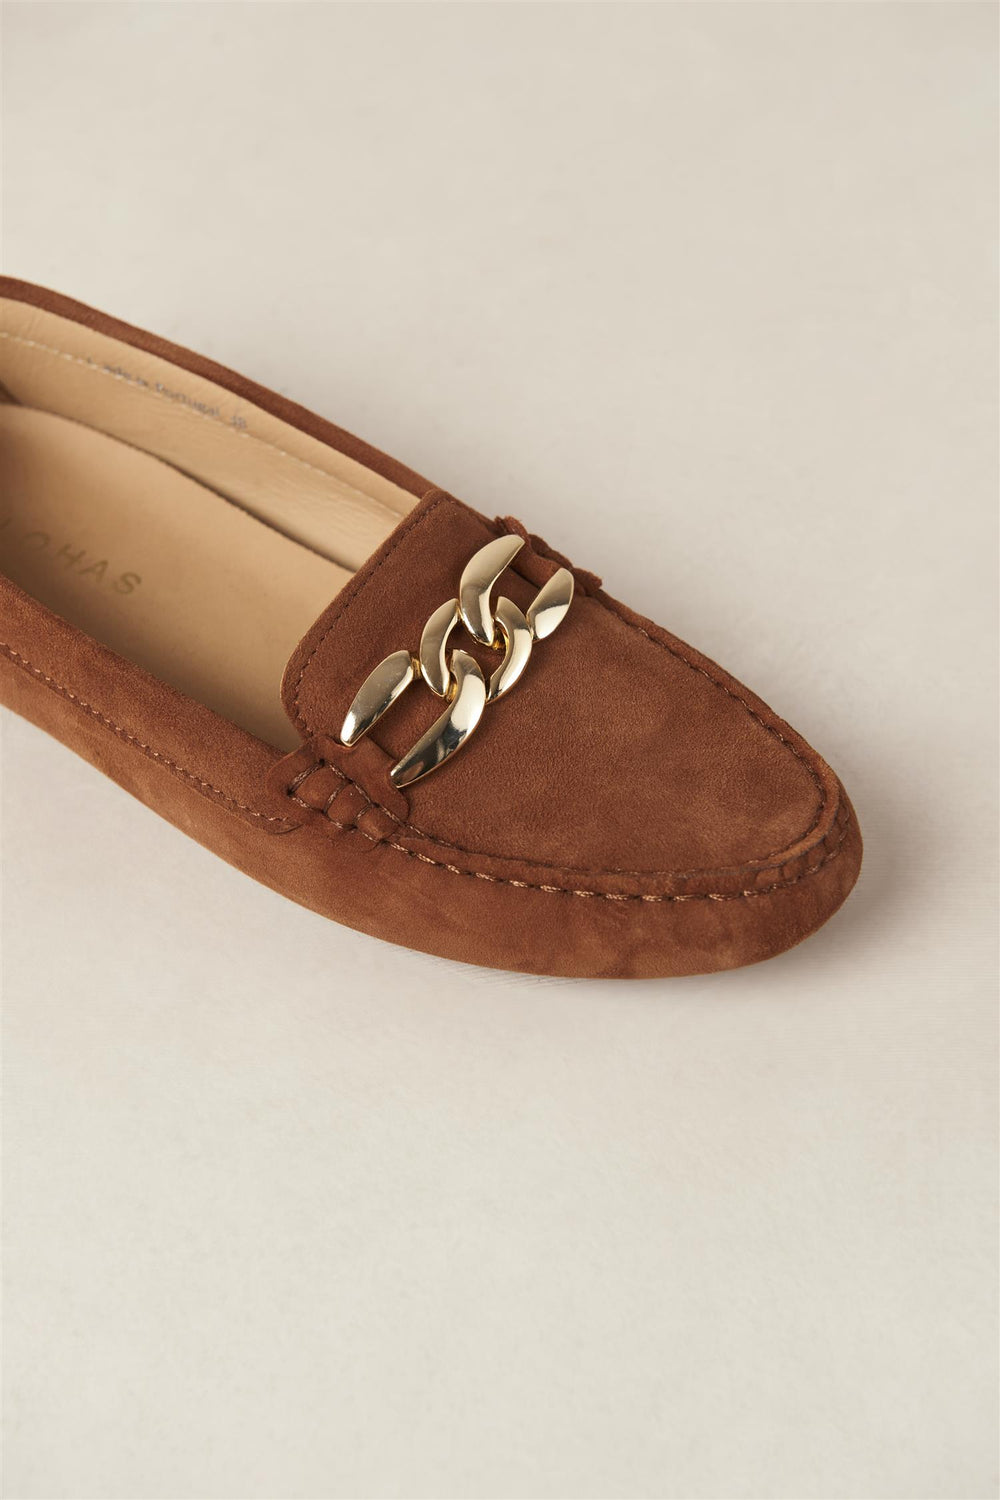 ALOHAS - Mike Suede Tan Leather Loafers - Dale